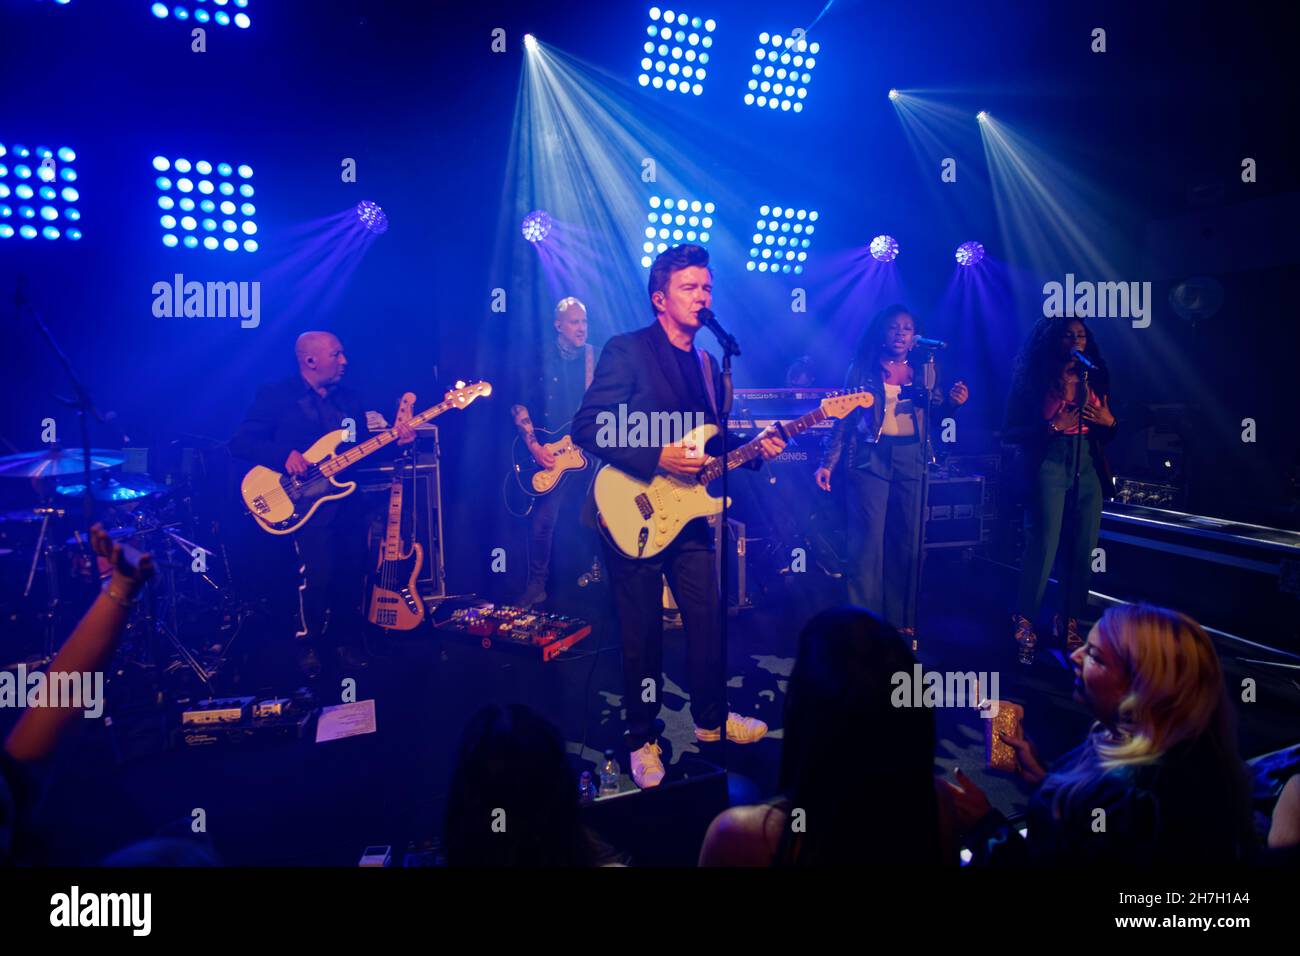 Rick Astley performing at Manchester Airport's Concorde Conference Centre during a charity event supporting Maggie's Manchester Cancer Support Centre. Stock Photo